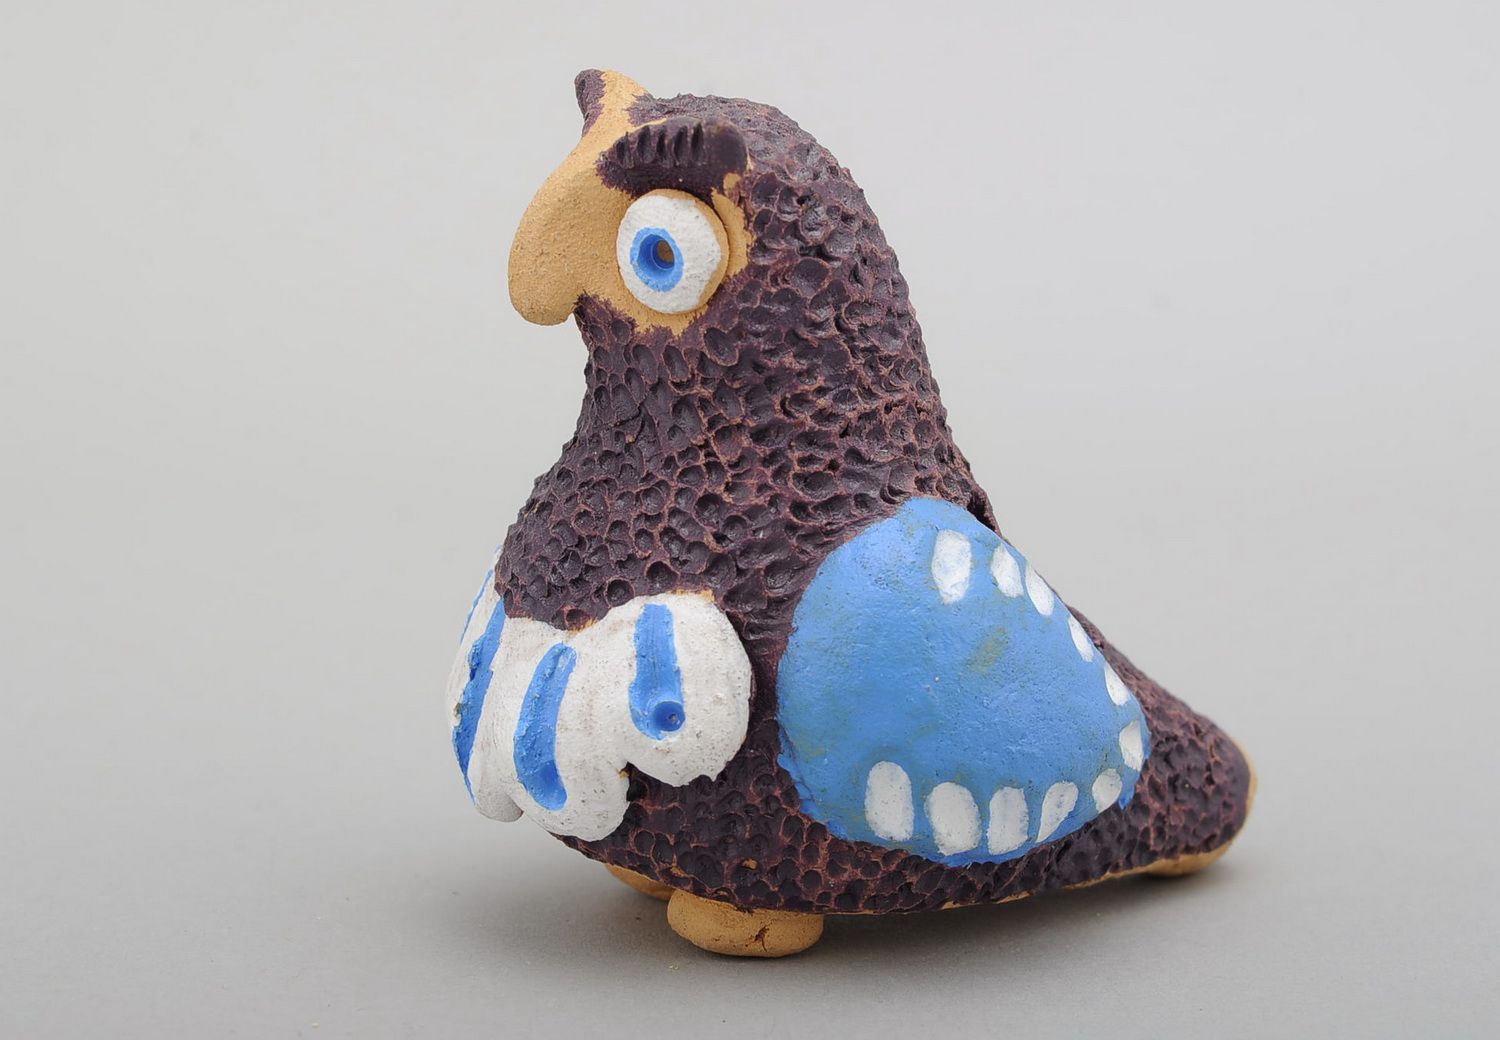 Penny whistle in the form of owl made of clay photo 1